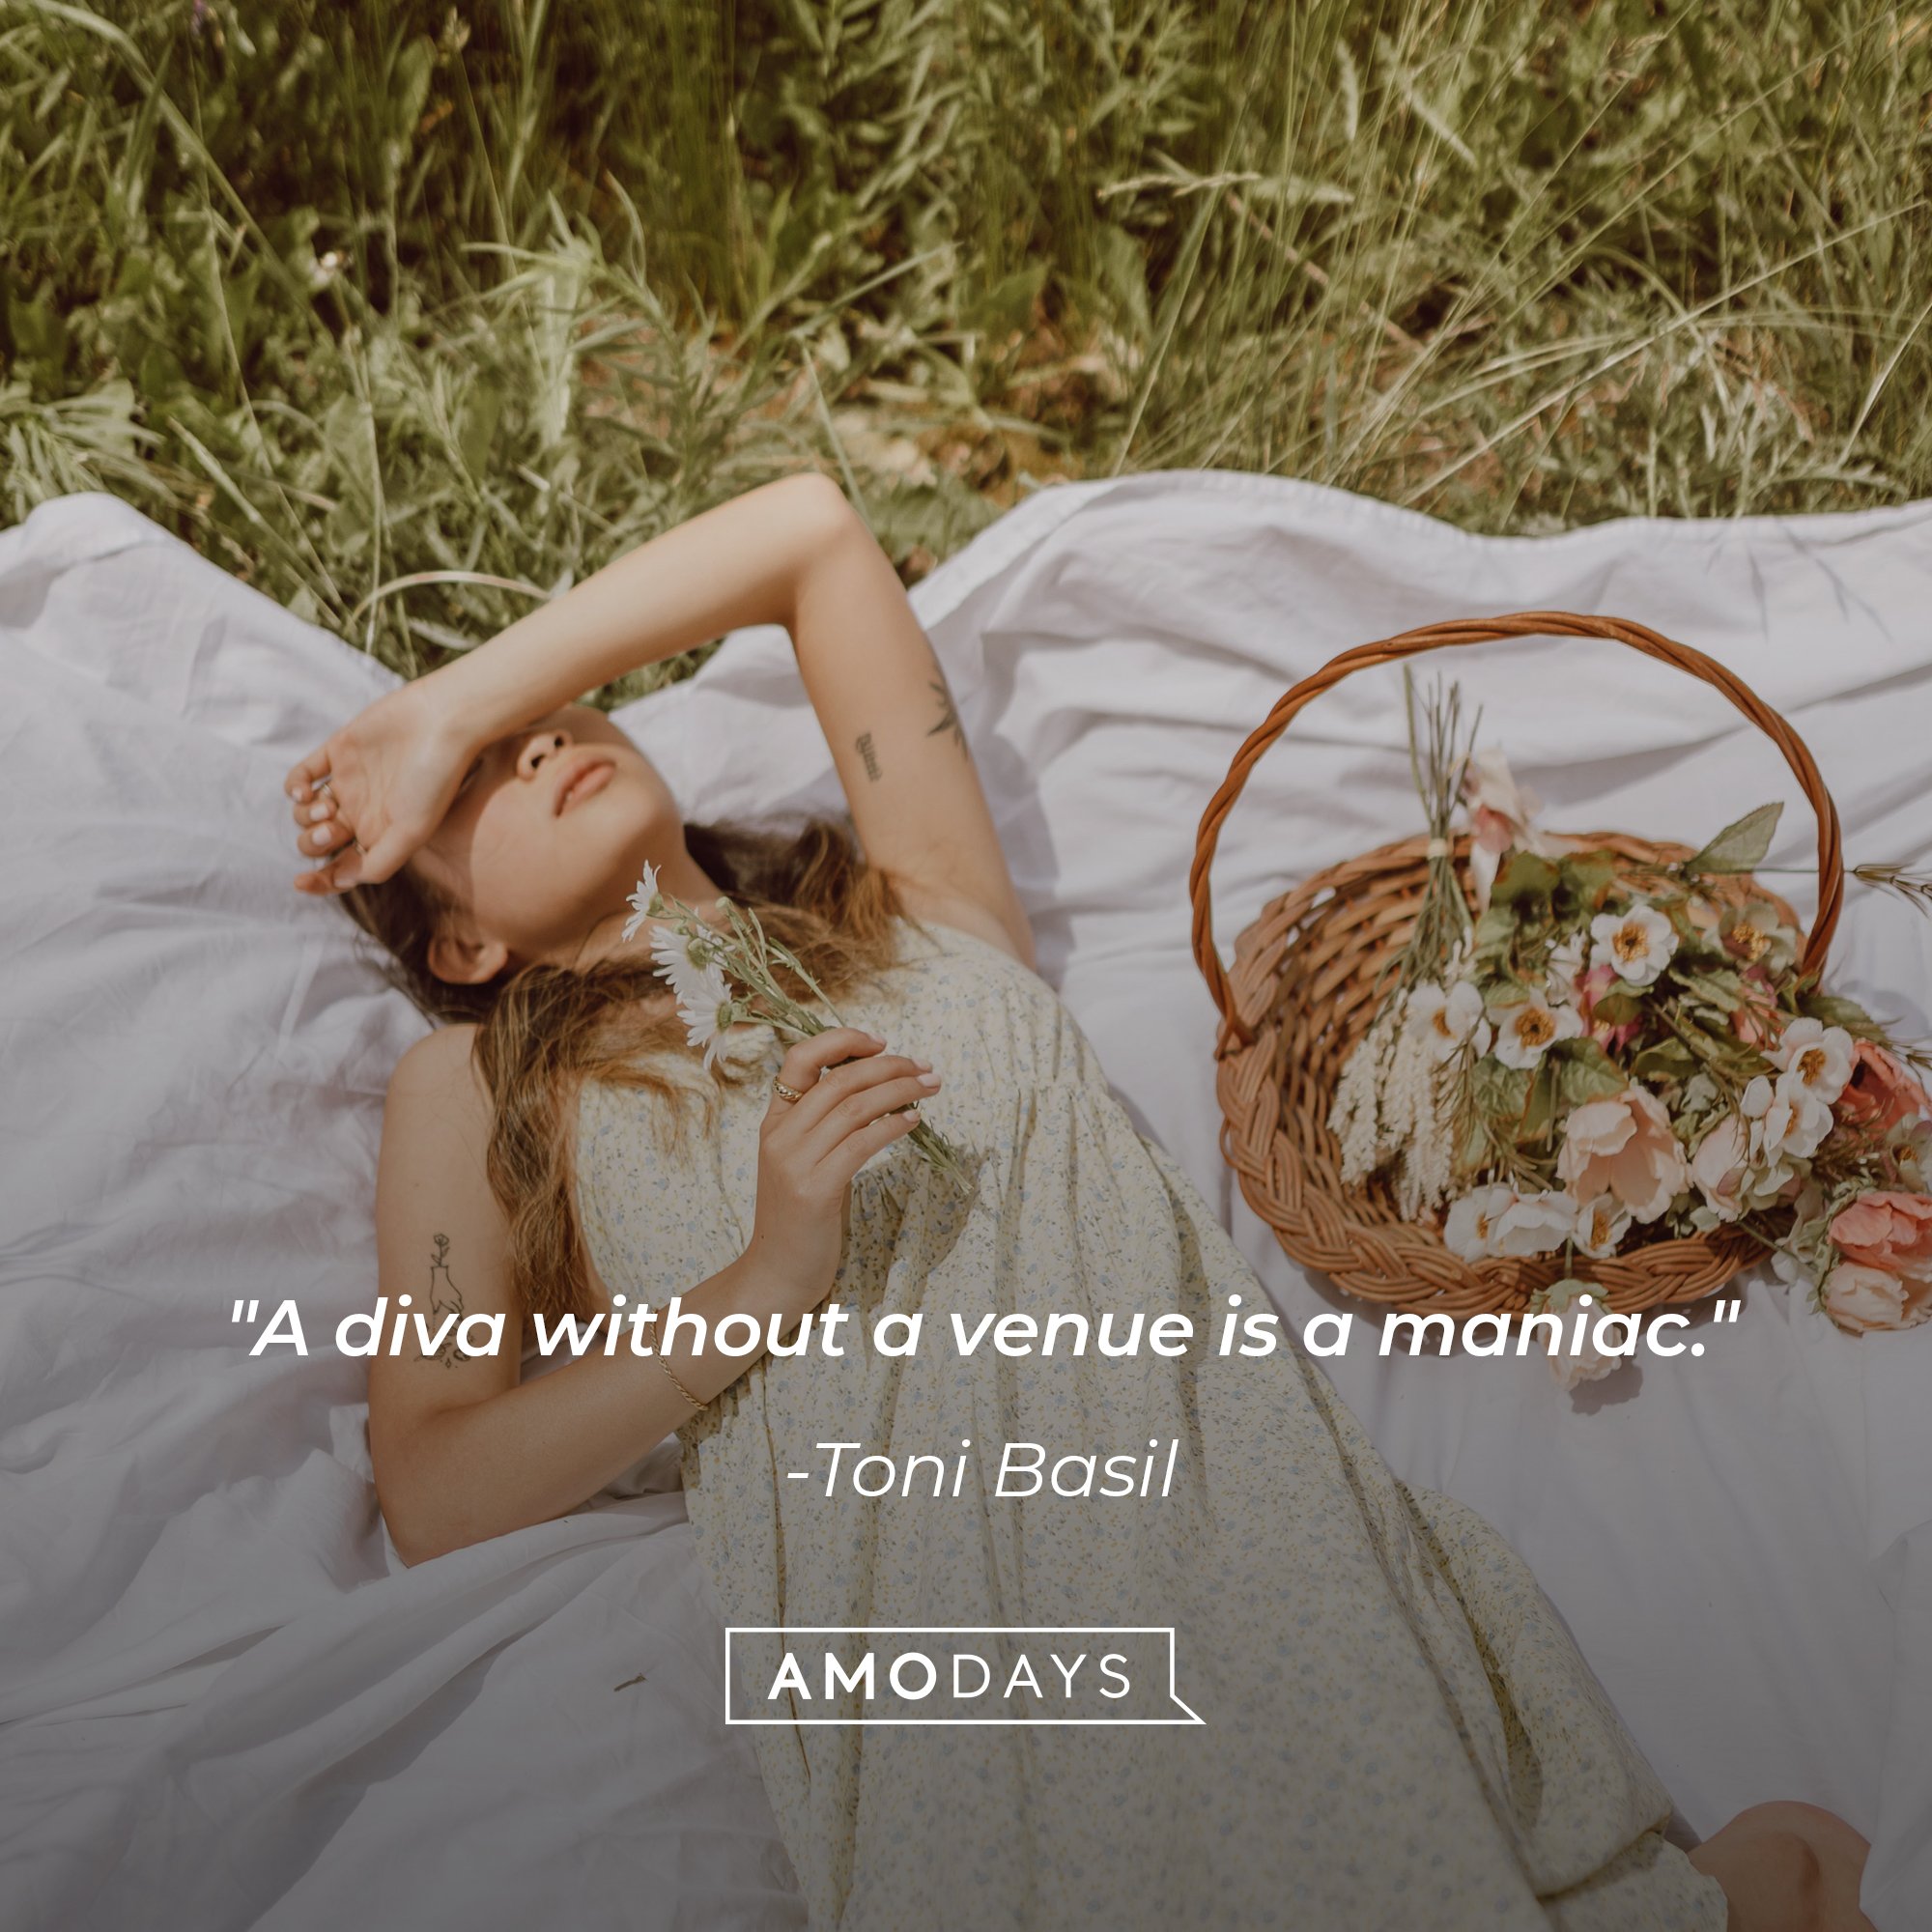 Toni Basil’s quote: "A diva without a venue is a maniac." | Image: AmoDays